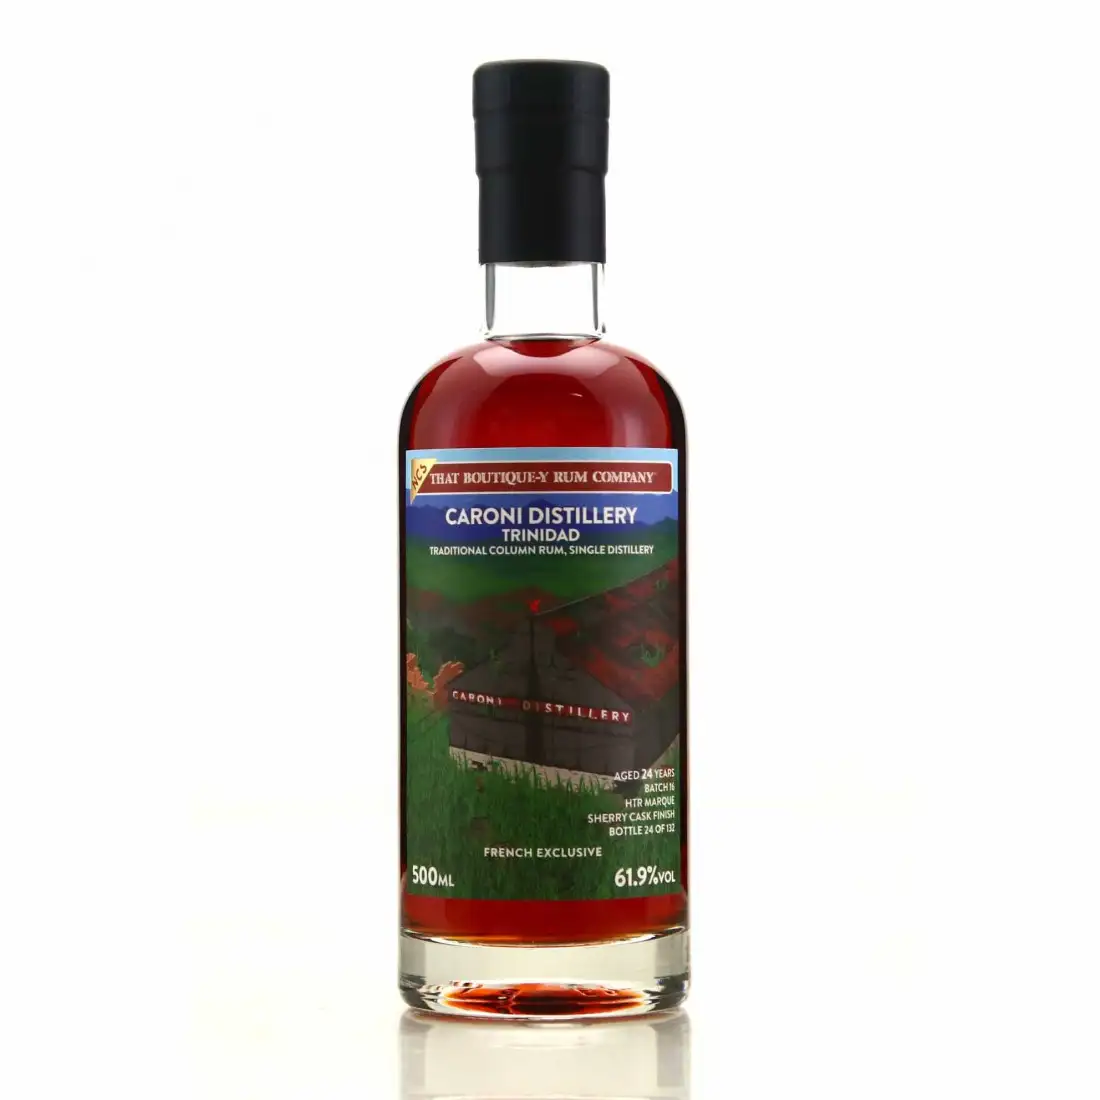 Image of the front of the bottle of the rum Caroni Distillery (French Exclusive) HTR